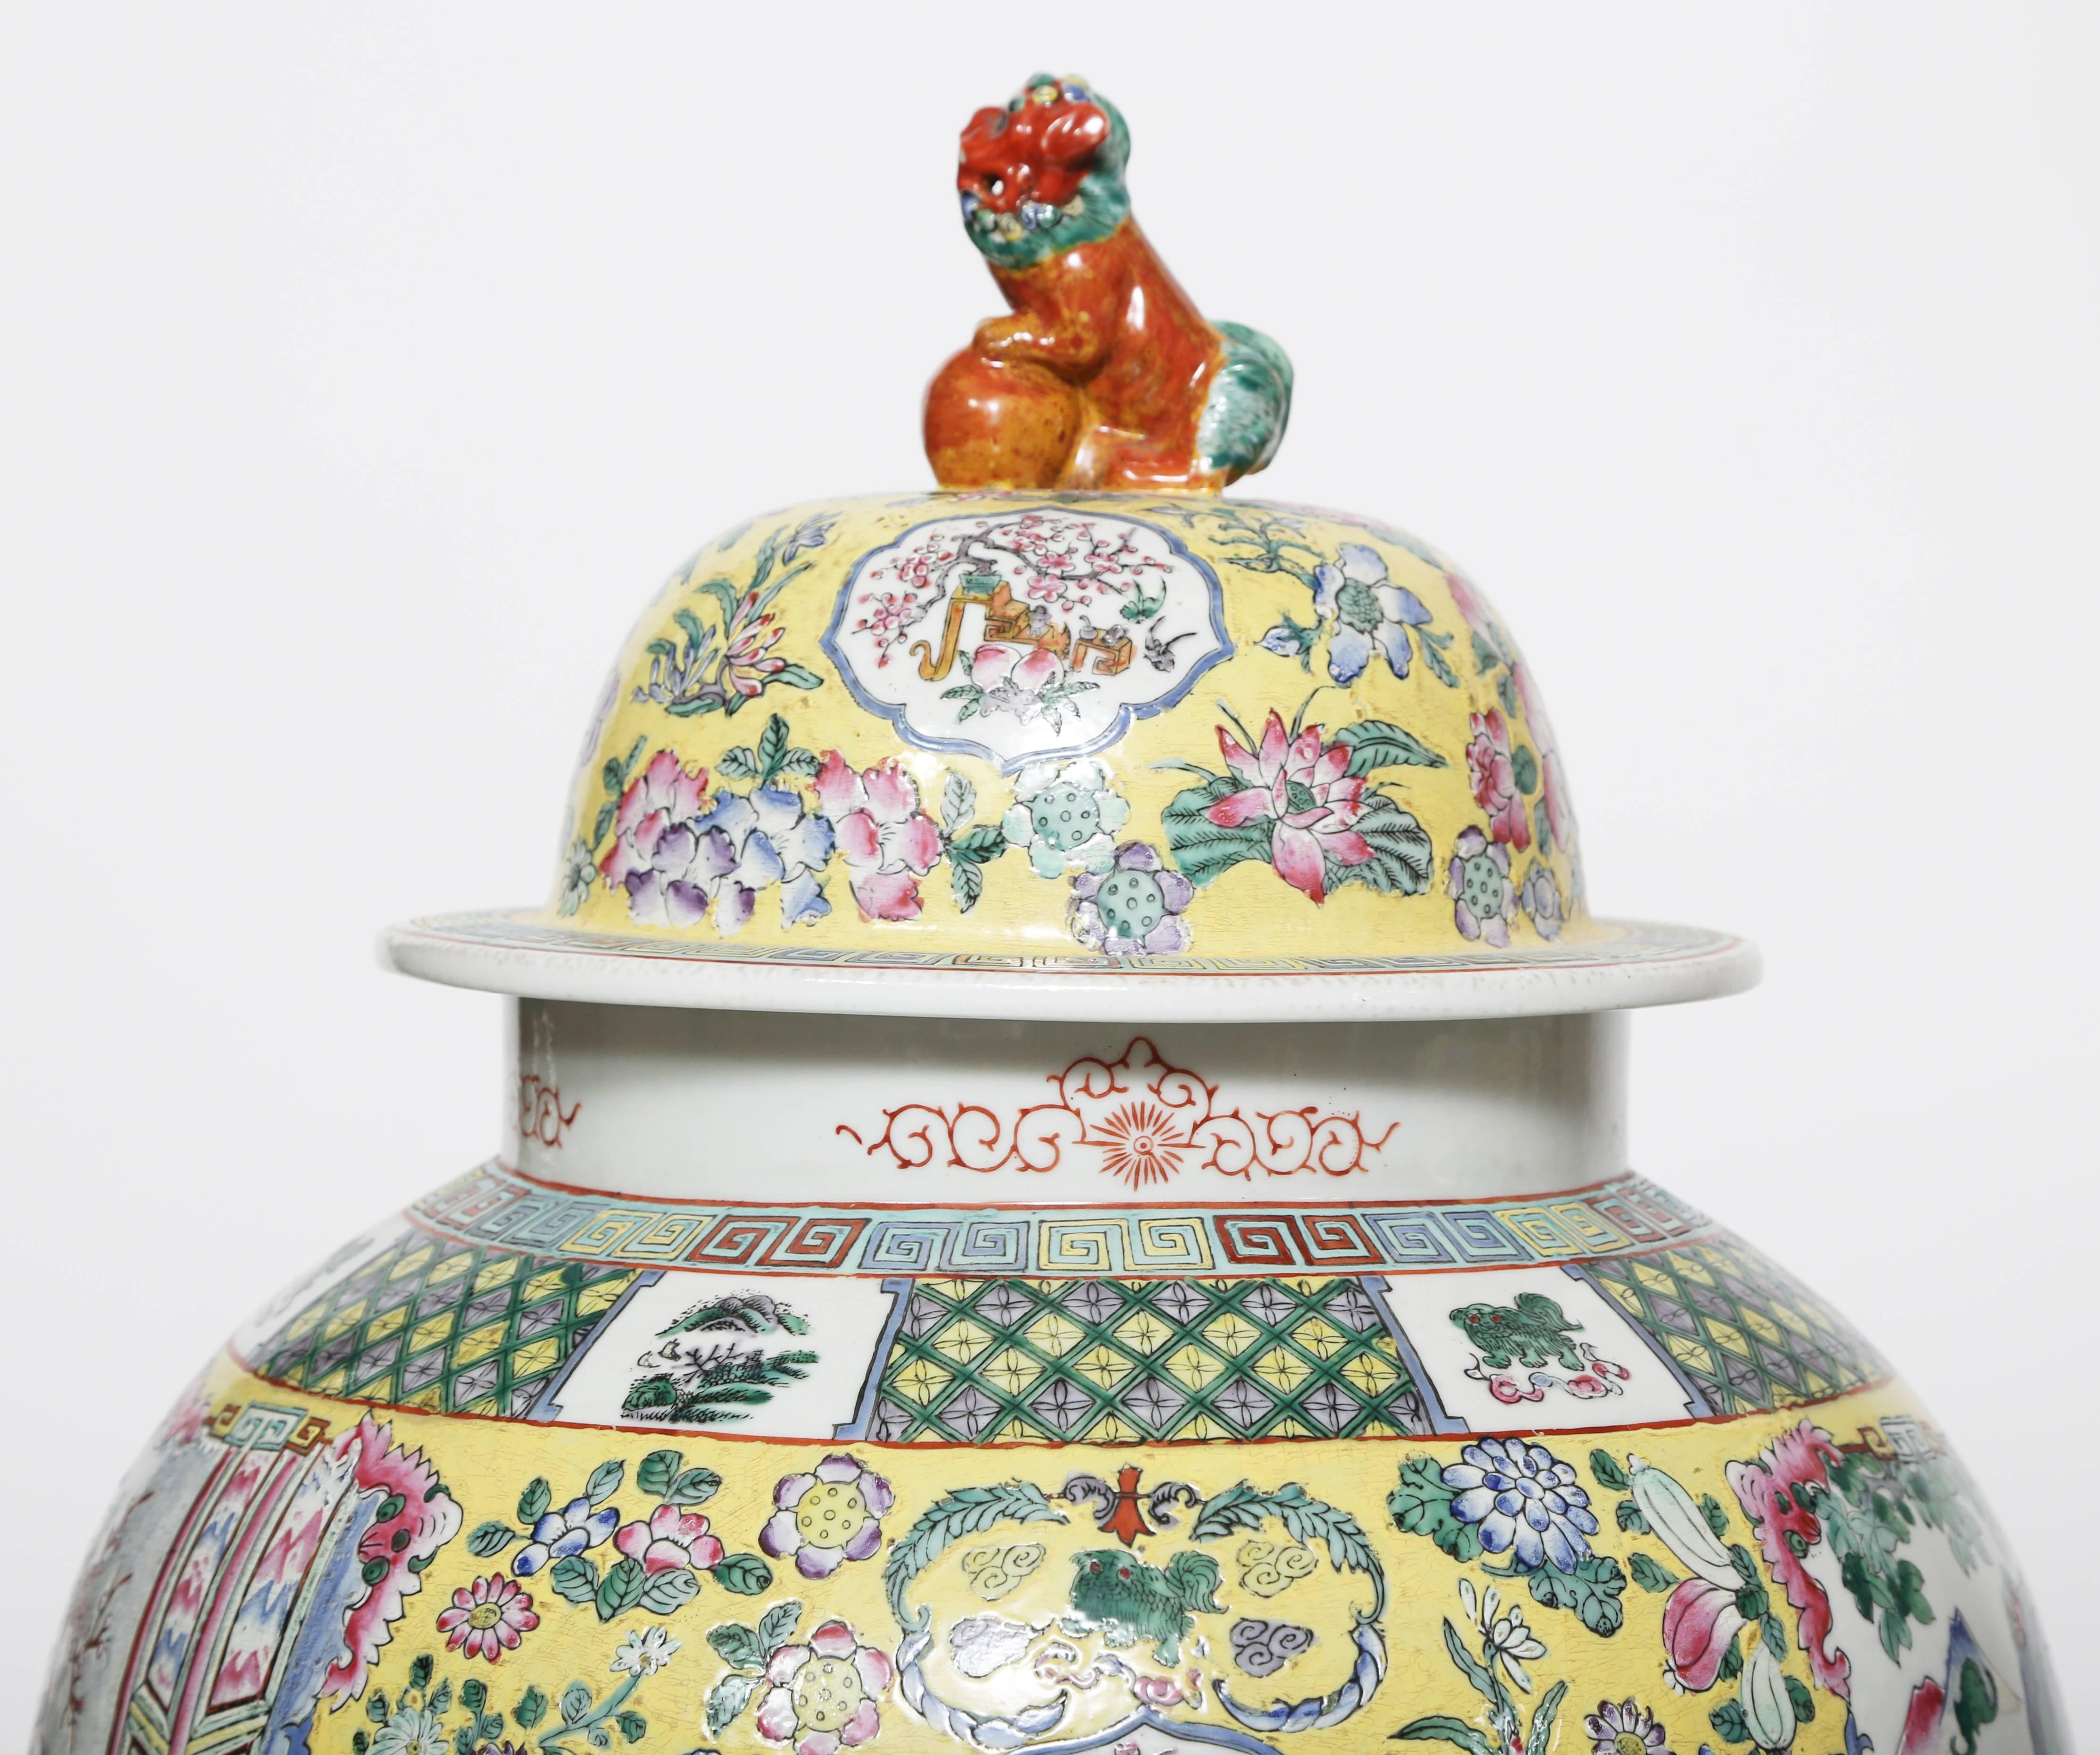  Pair of Chinese Polychromed Porcelain Temple Jars with Covers-30 1/2